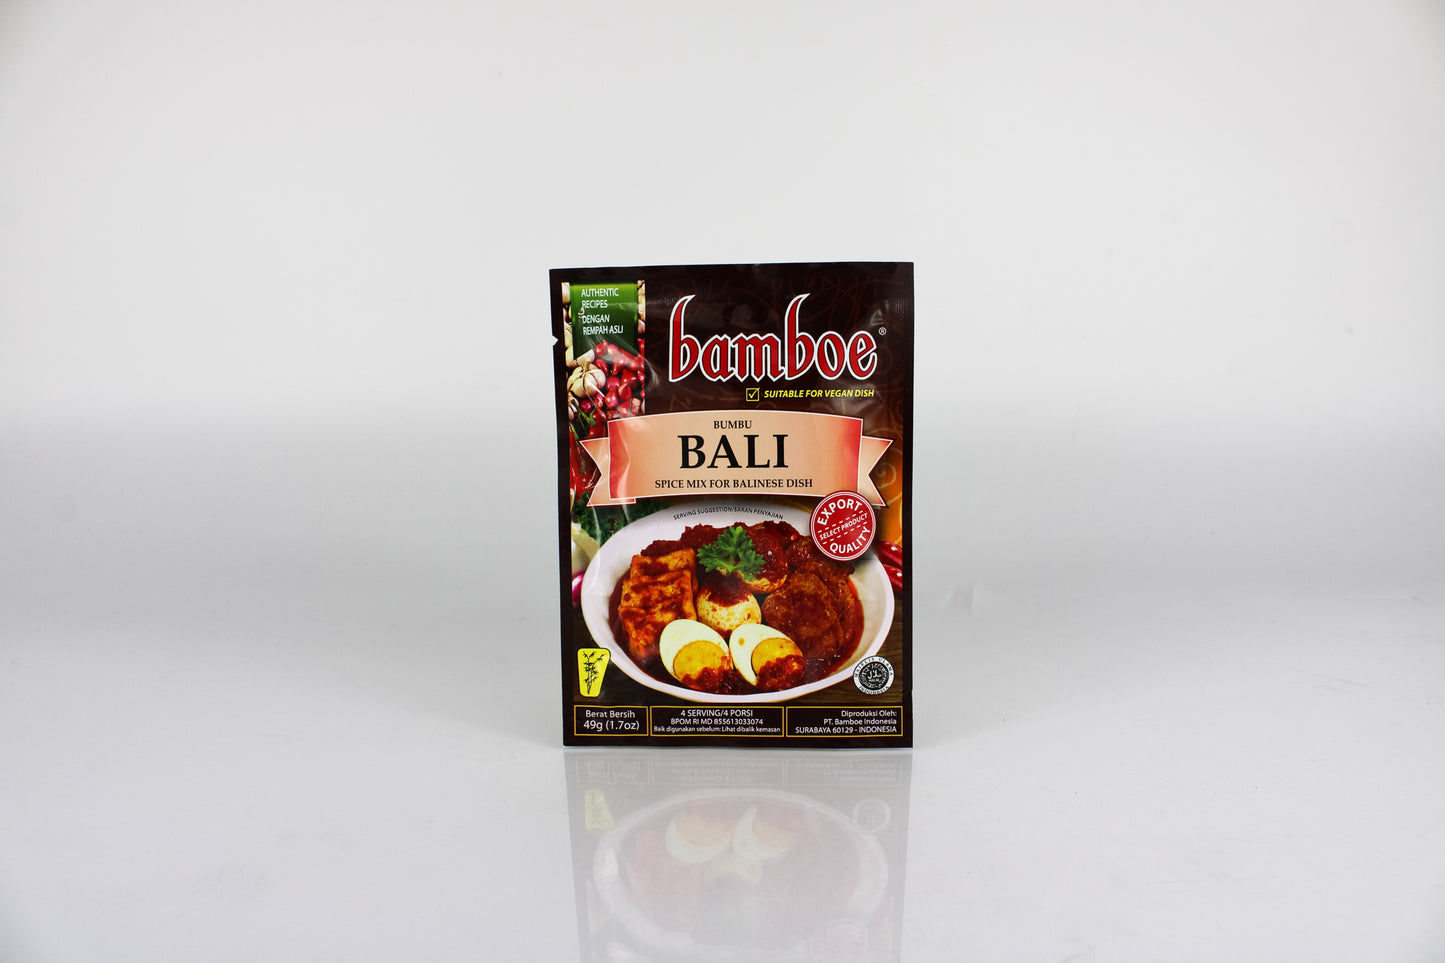 Bamboe Bali (Spice Mix For Balinese Dish)